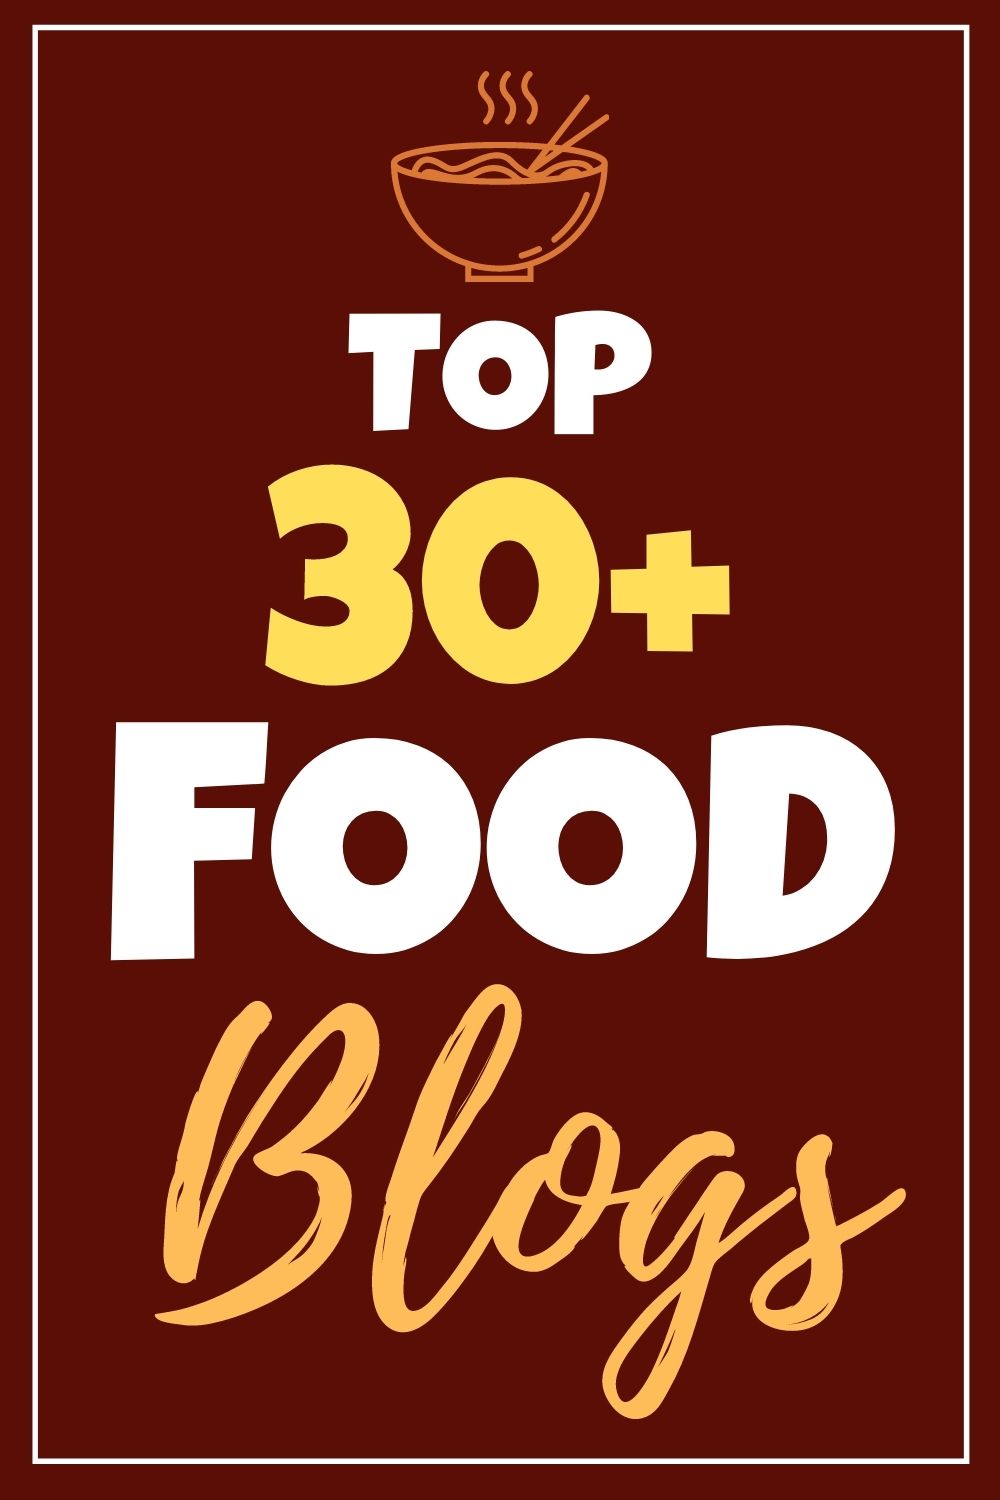 Top 30+ Food Blogs Insanely Good